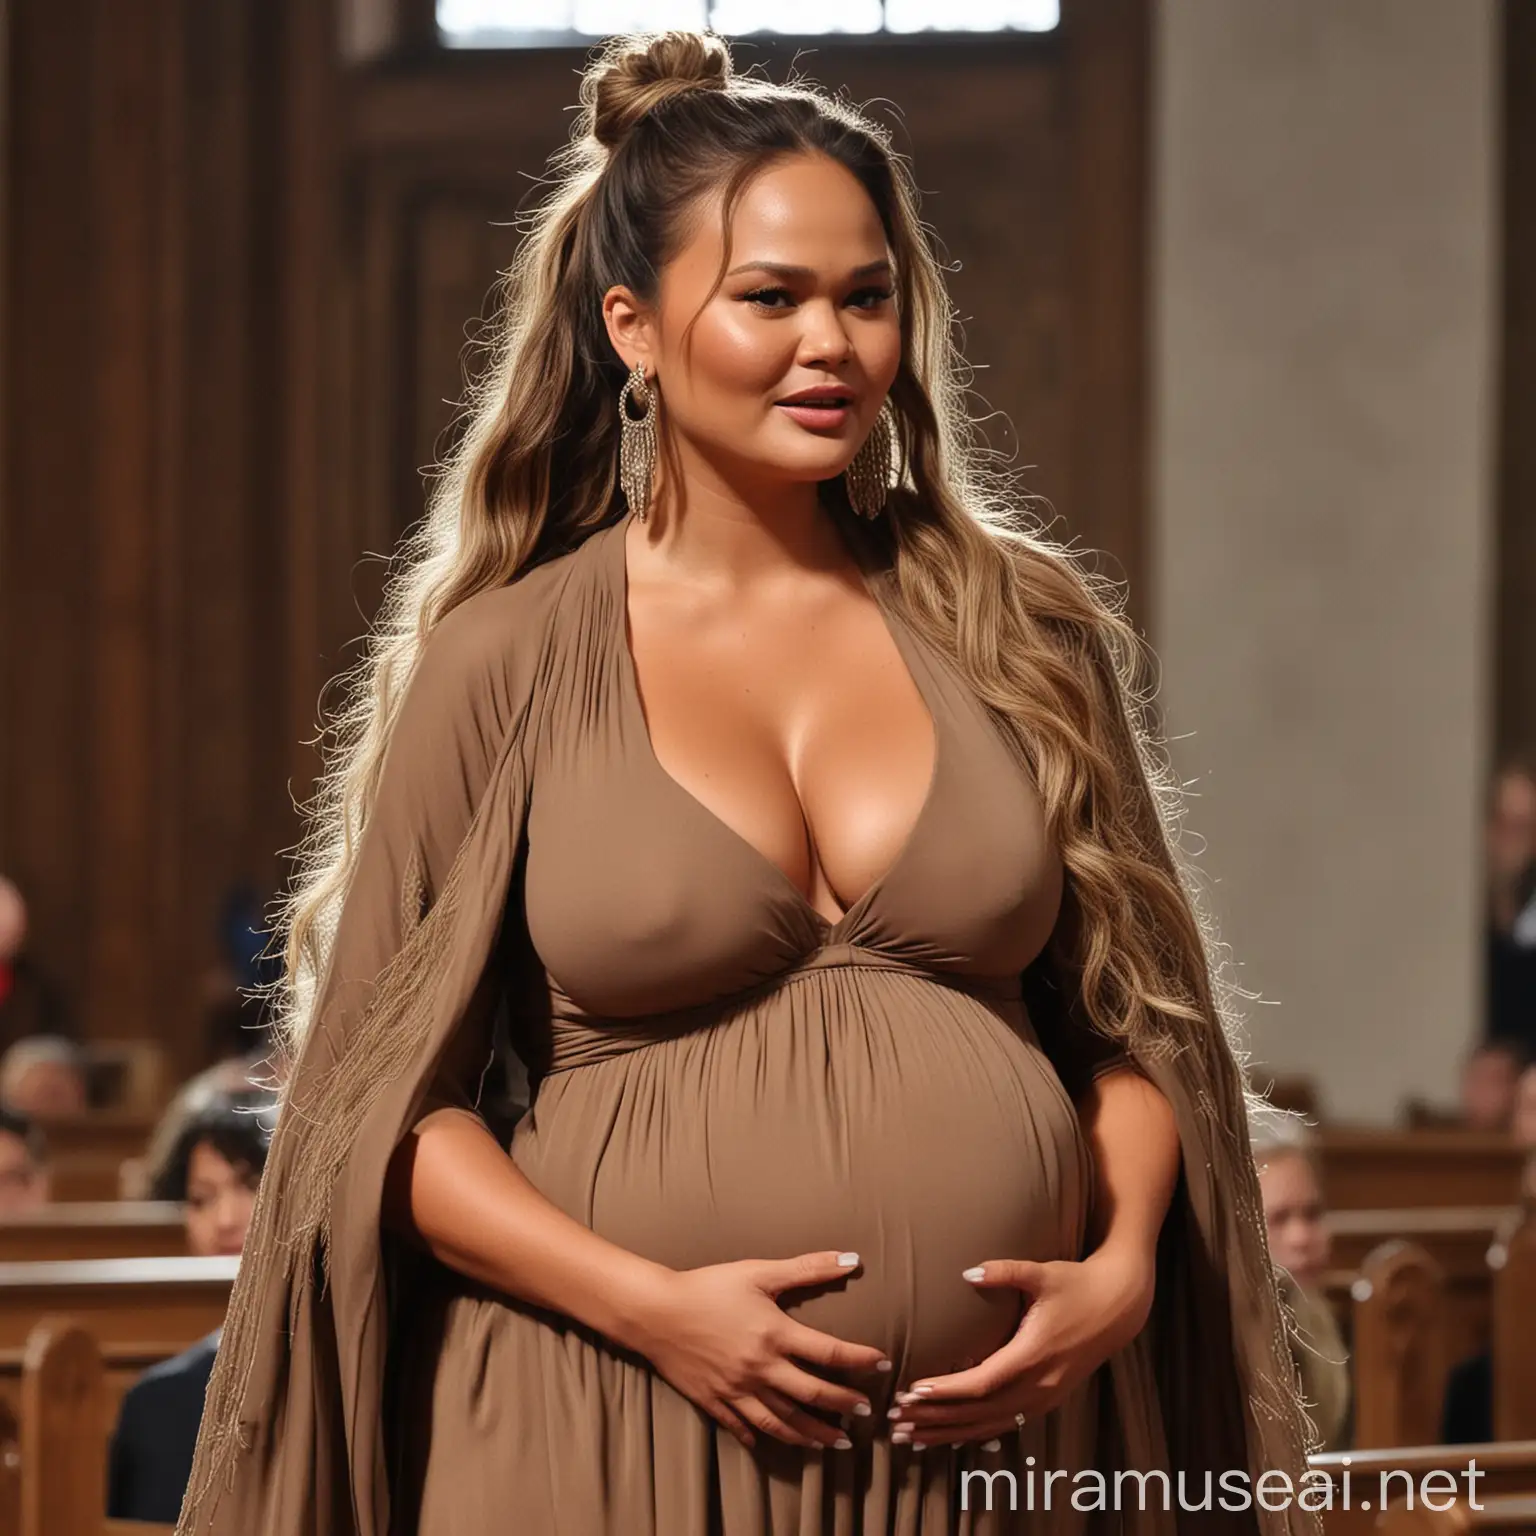 Chrissy Teigen with big pregnant belly in church, big long kinky hair in a ponytail, giant breasts, showing massive cleavage, zoomed in from the waist up
